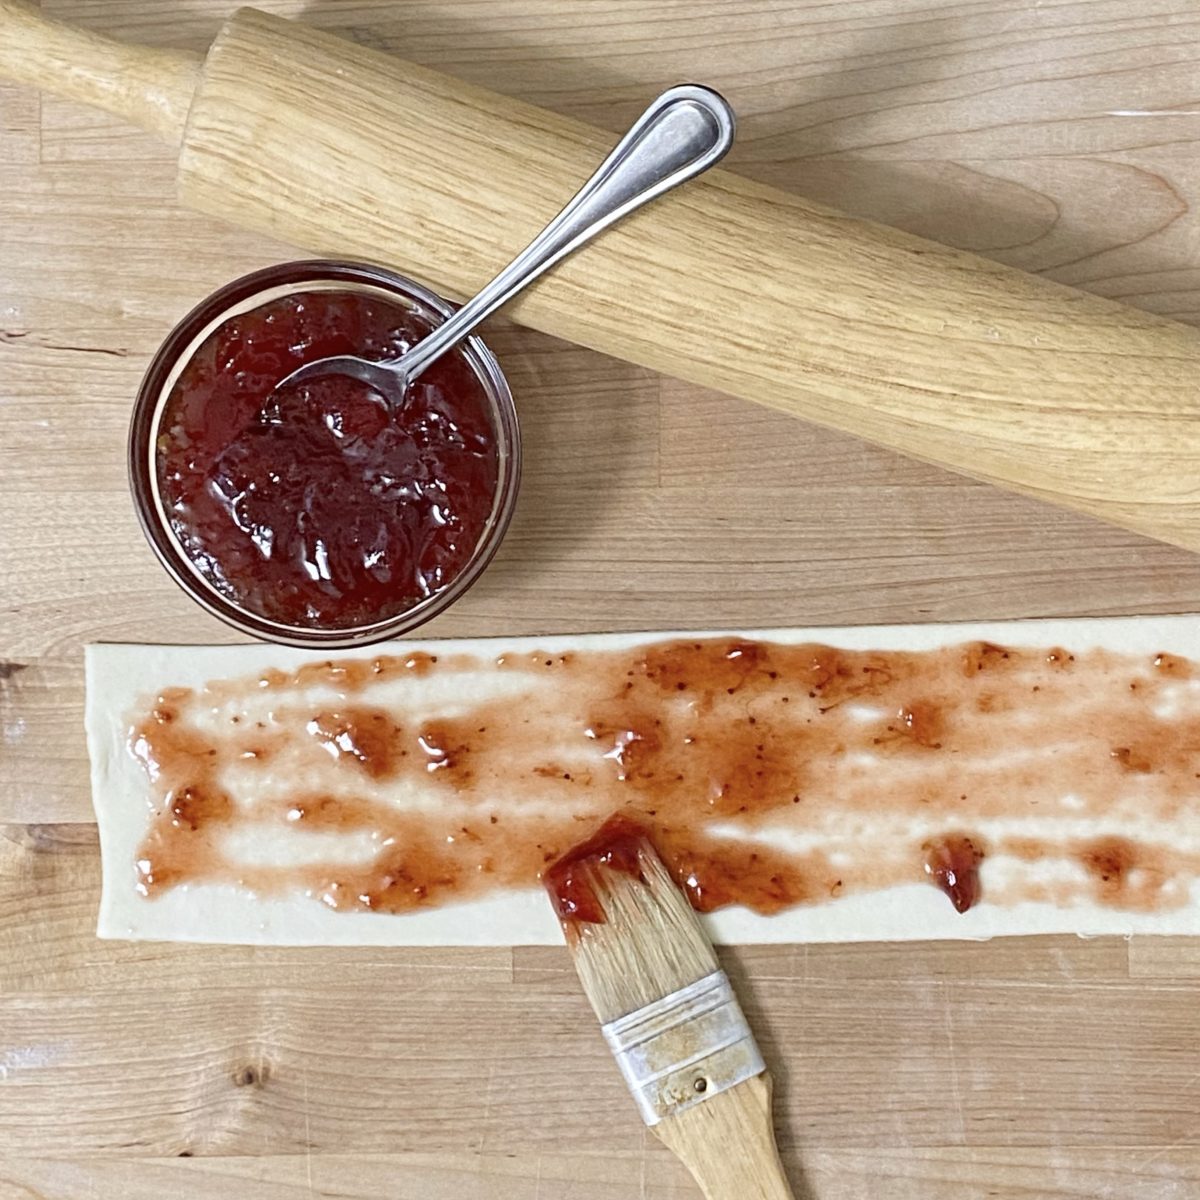 Strawberry preserves being spread on a strip of puff pastry dough with a pastry brush.